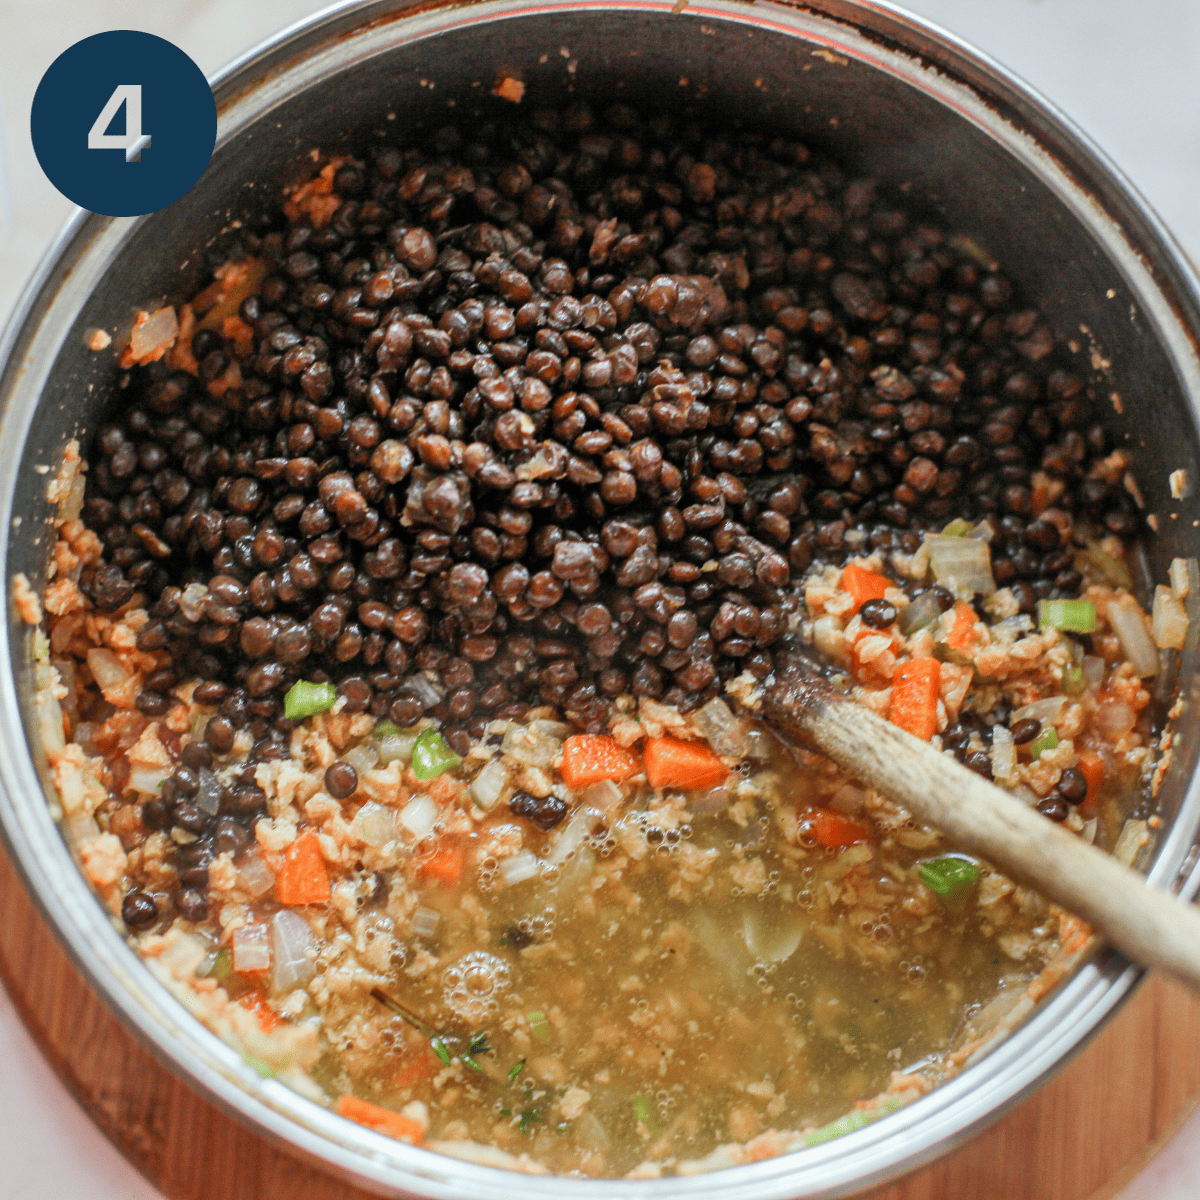 Adding cooked lentils to shepherds pie mix.